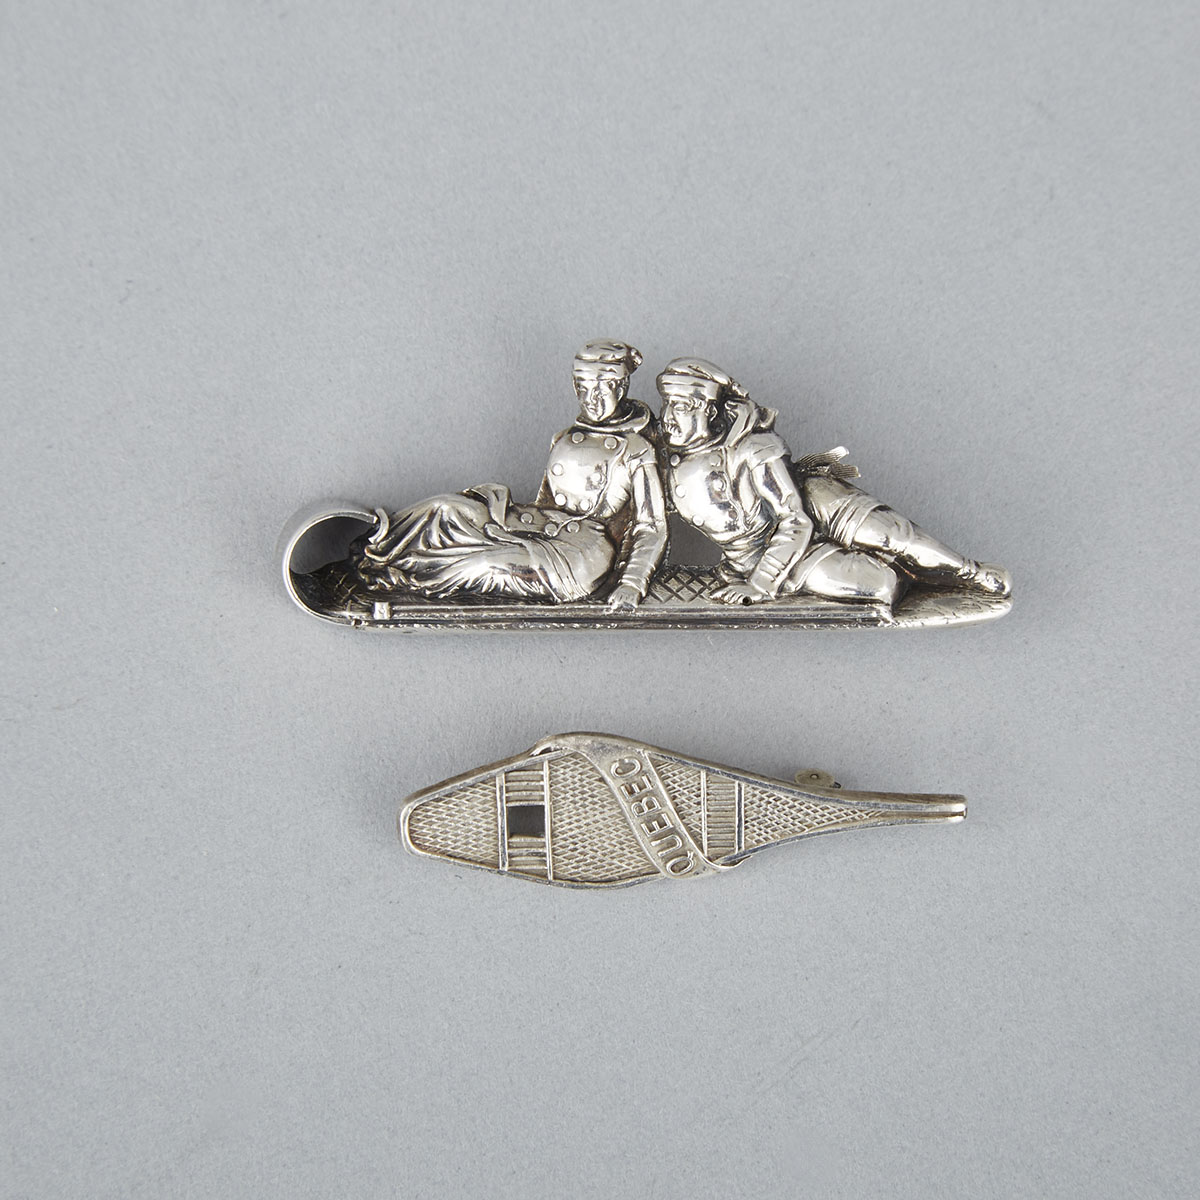 Two Canadian Silver Novelty Pins, late 19th/early 20th century